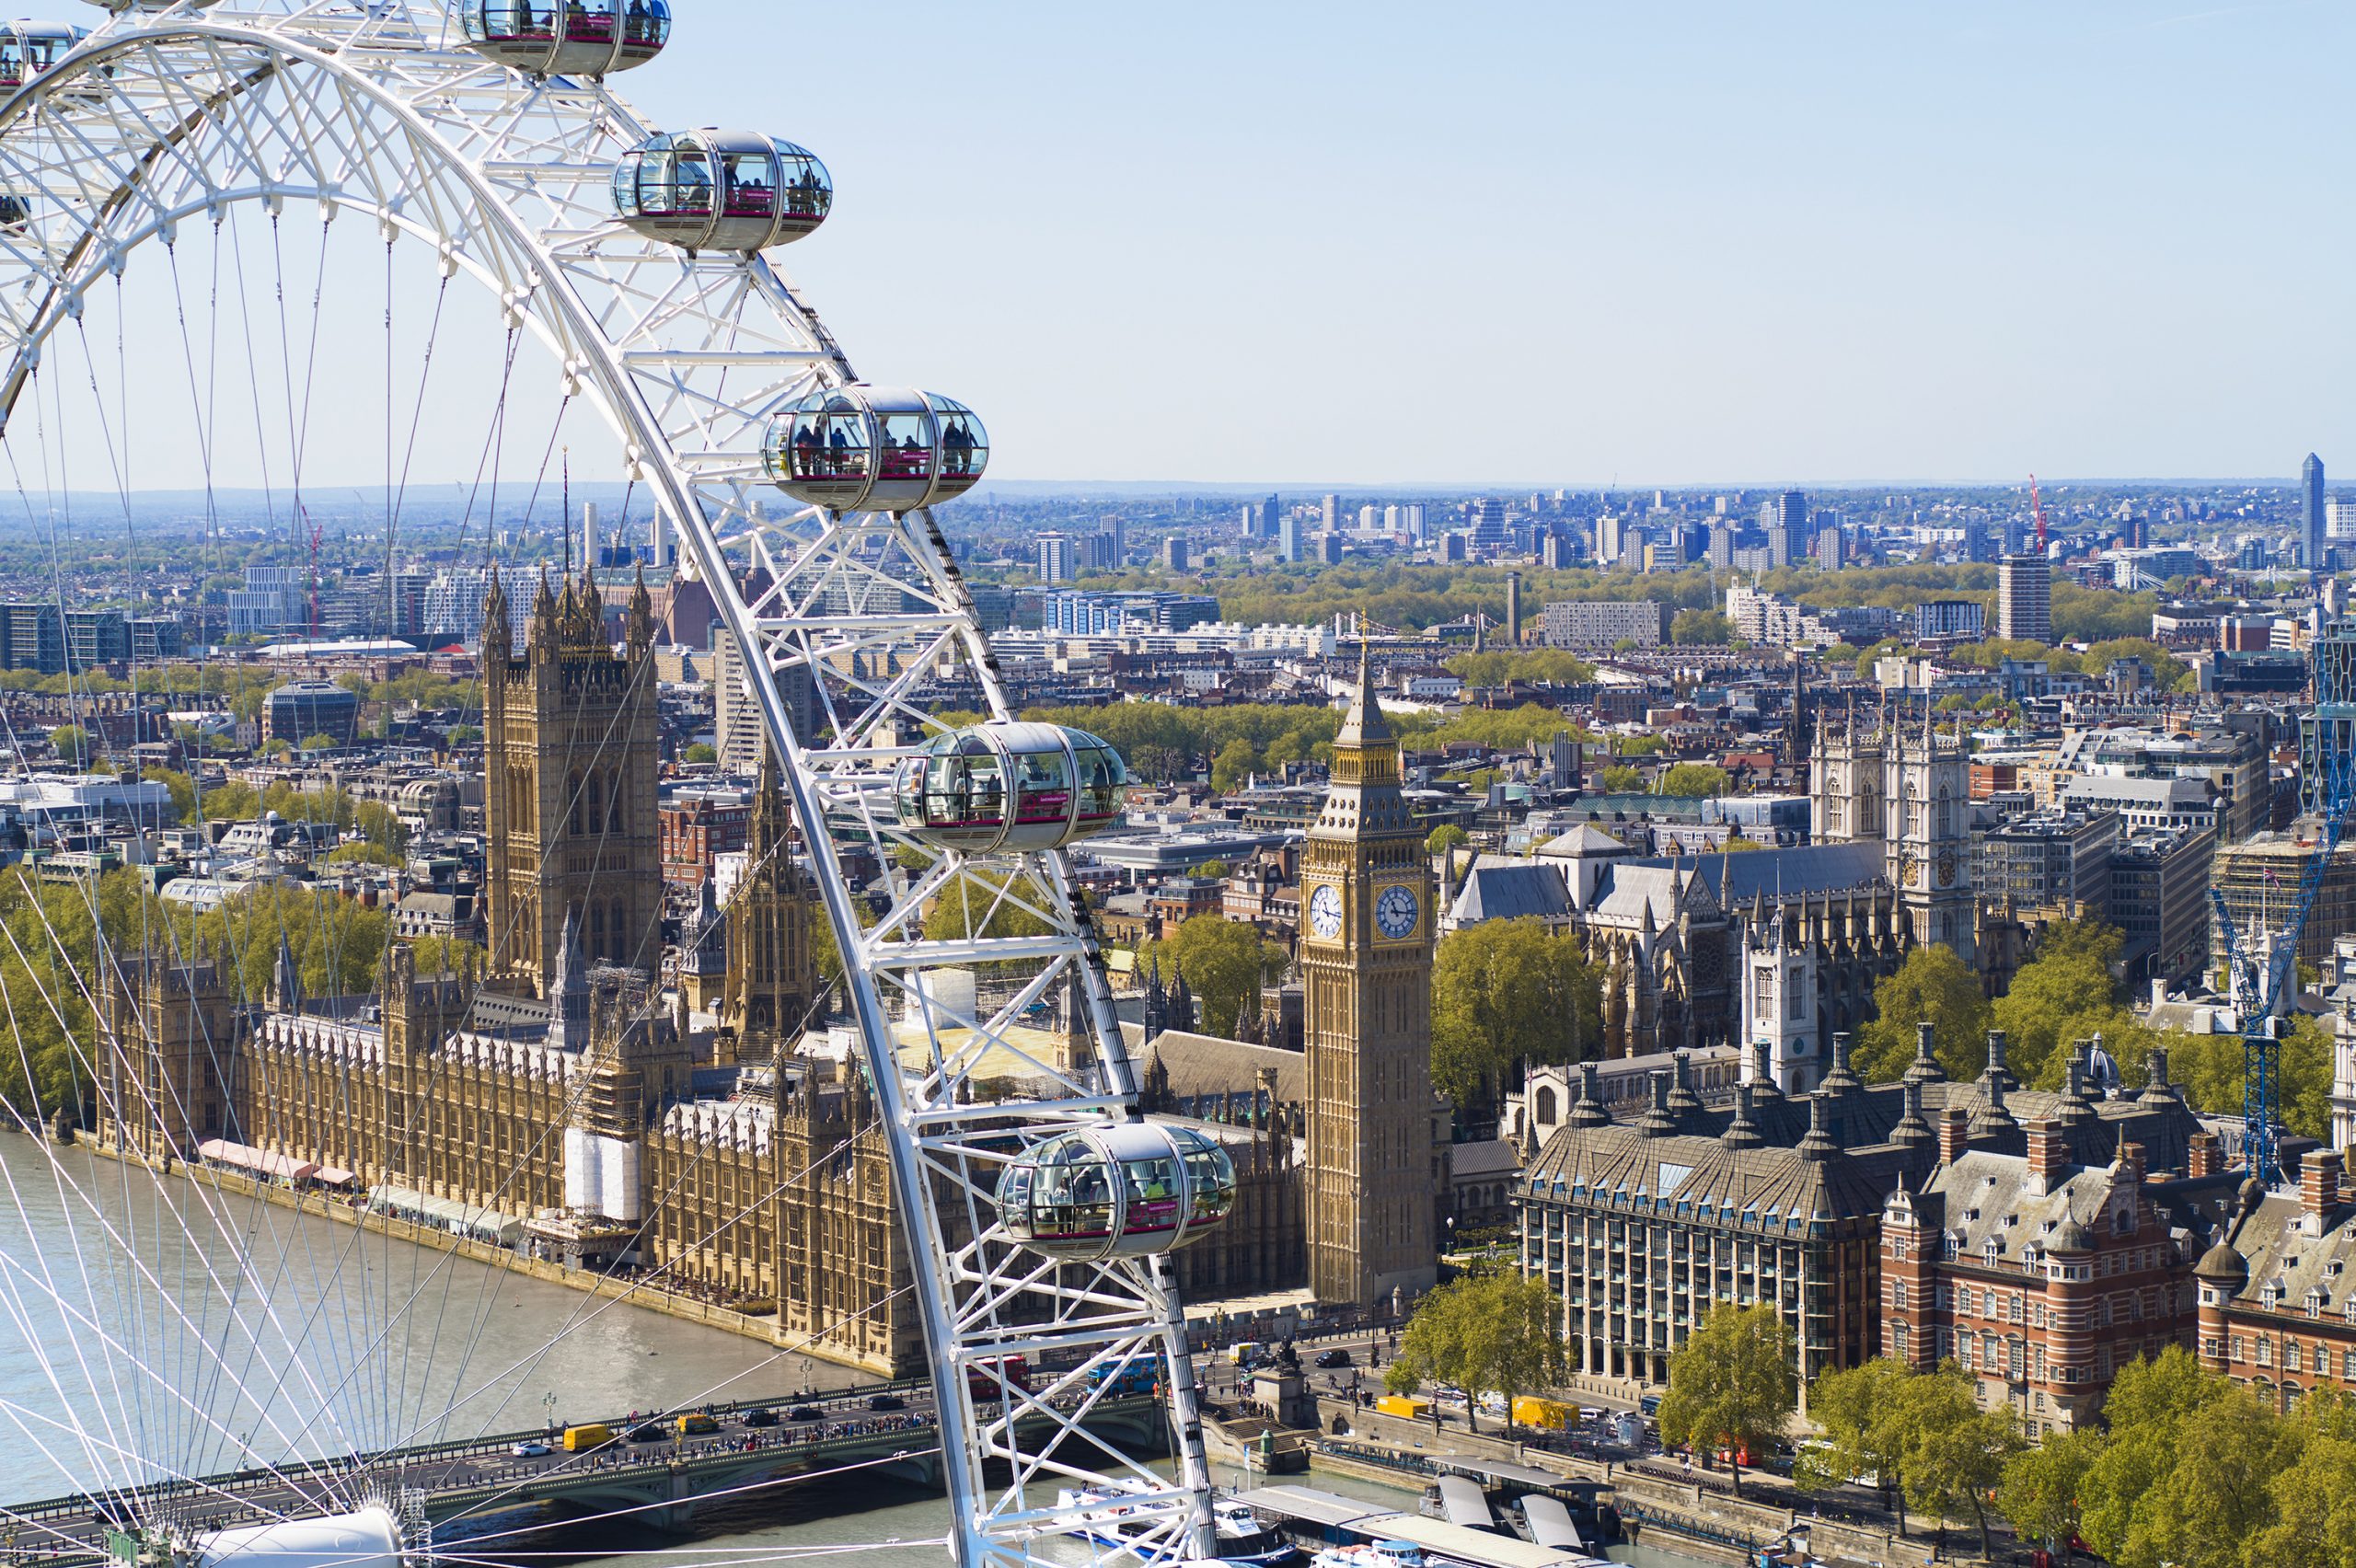 Get two tickets to the Lastminute.com London Eye and save up to £78